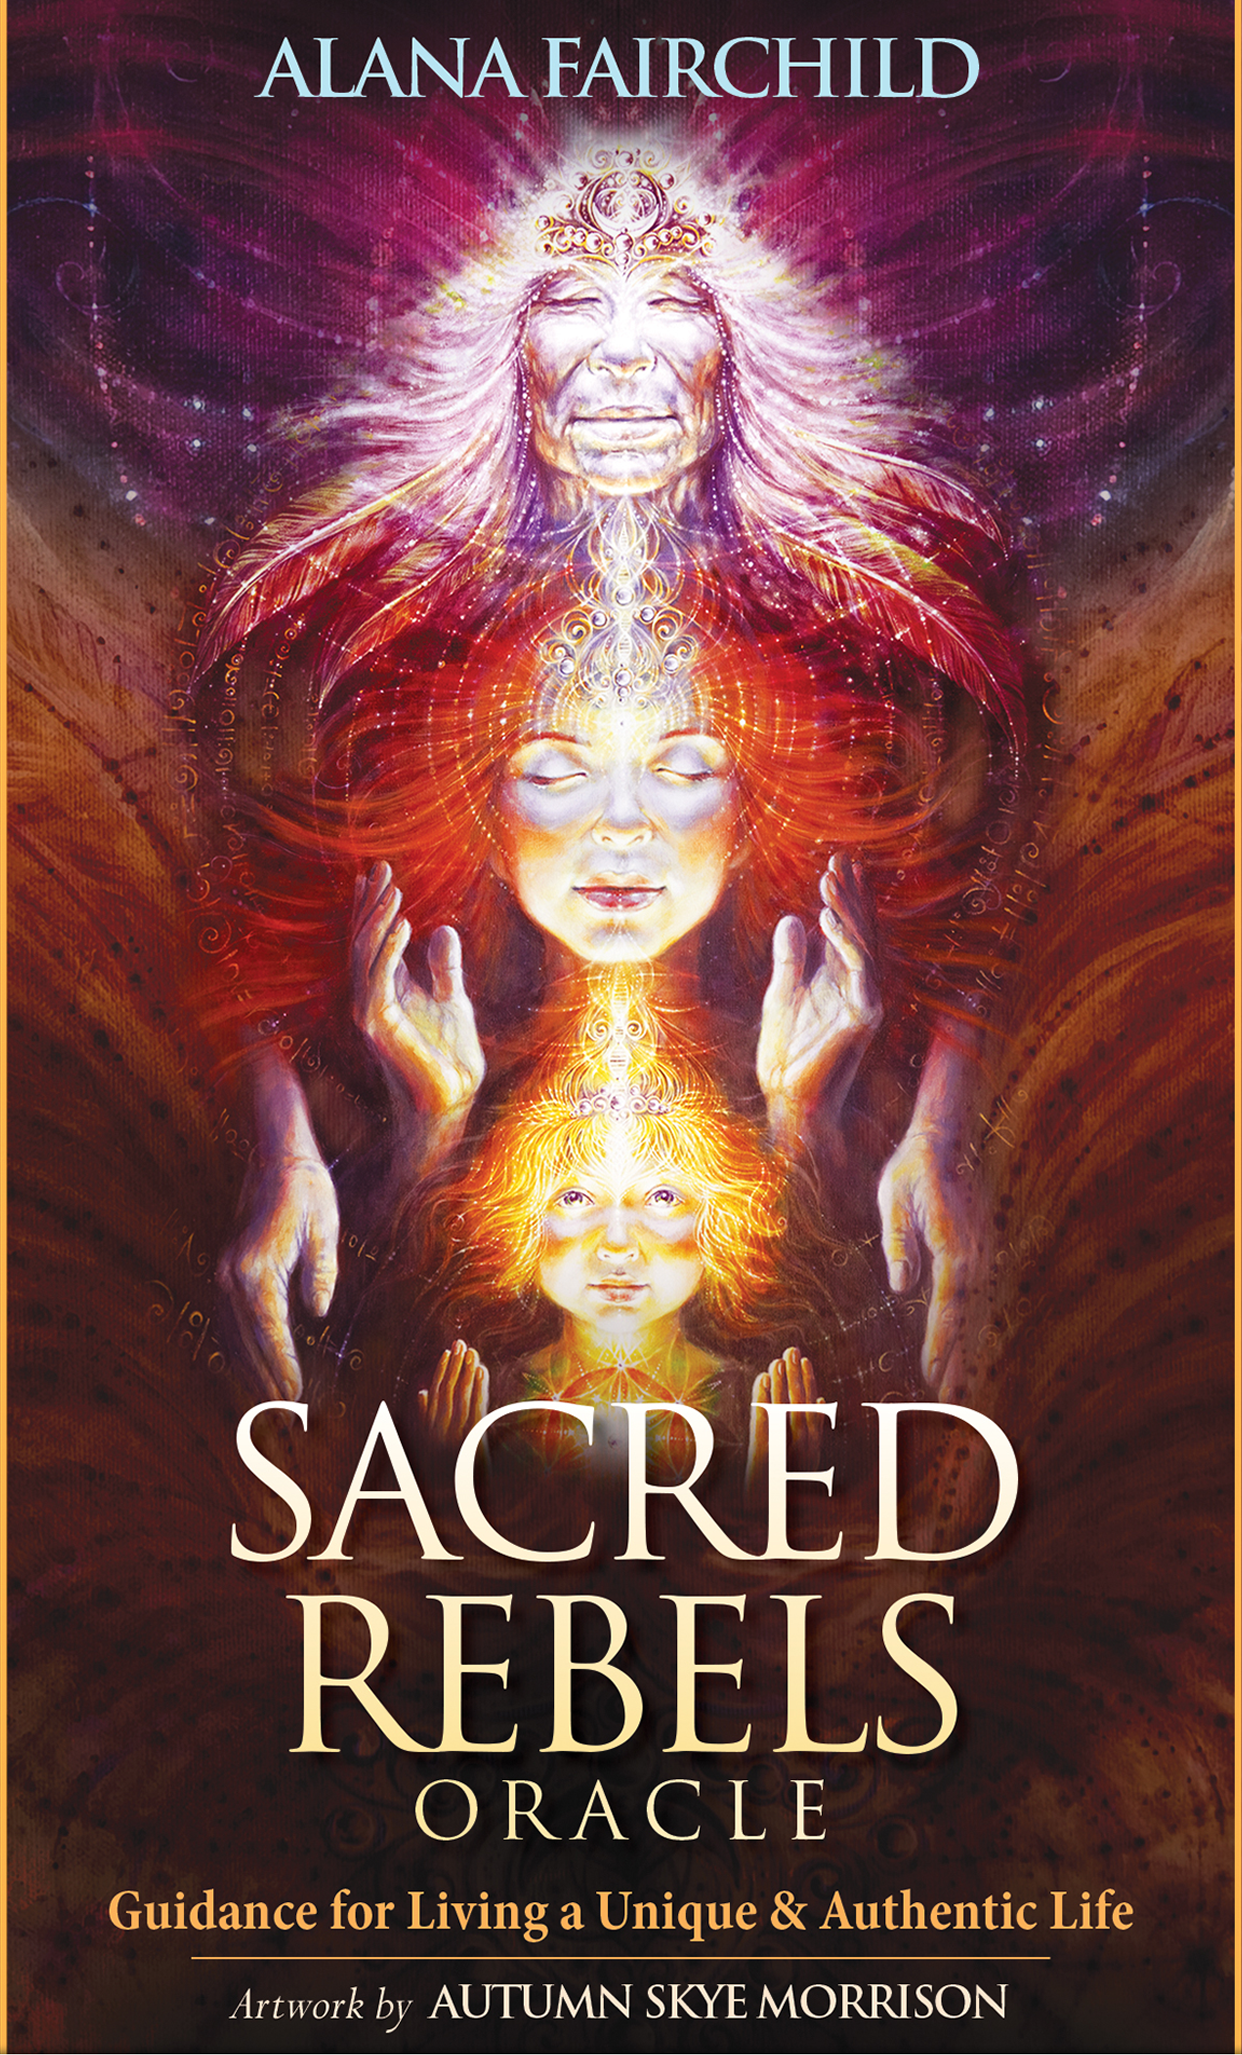 Sacred Rebels Oracle by Alana Fairchild